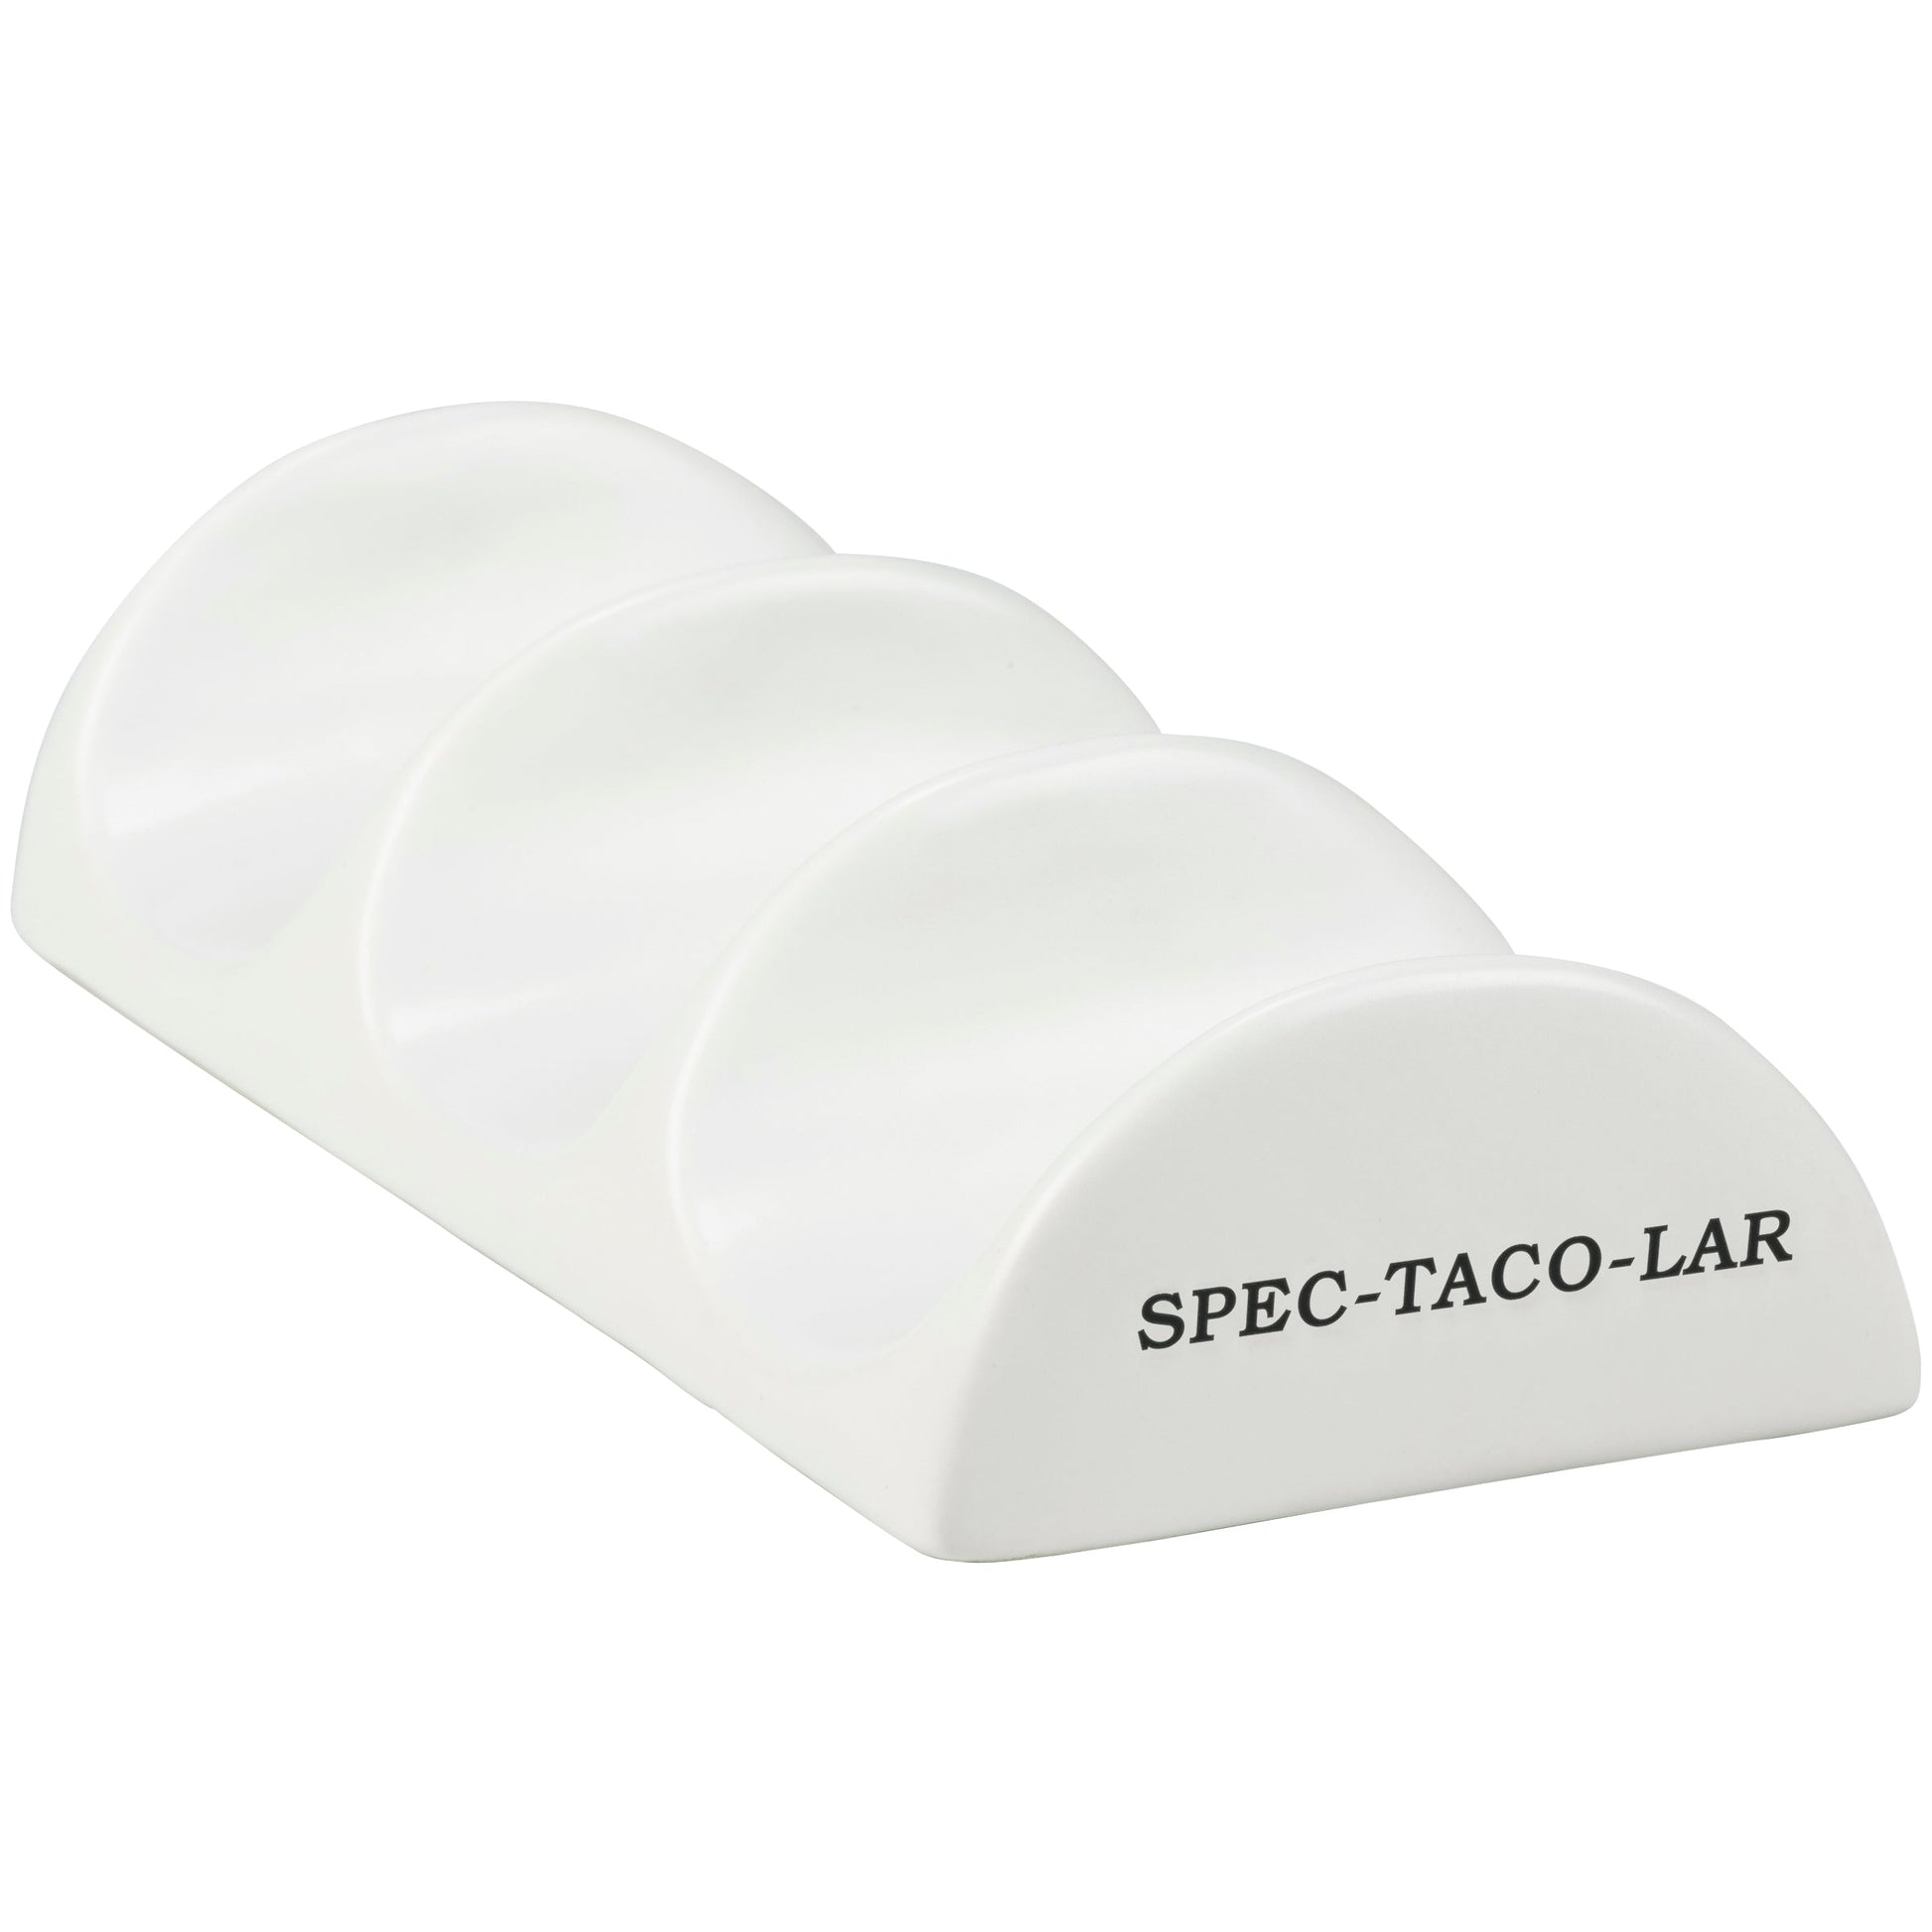 Spectacolar Taco Holder | Stoneware Personal Taco Stand for 3 Tacos